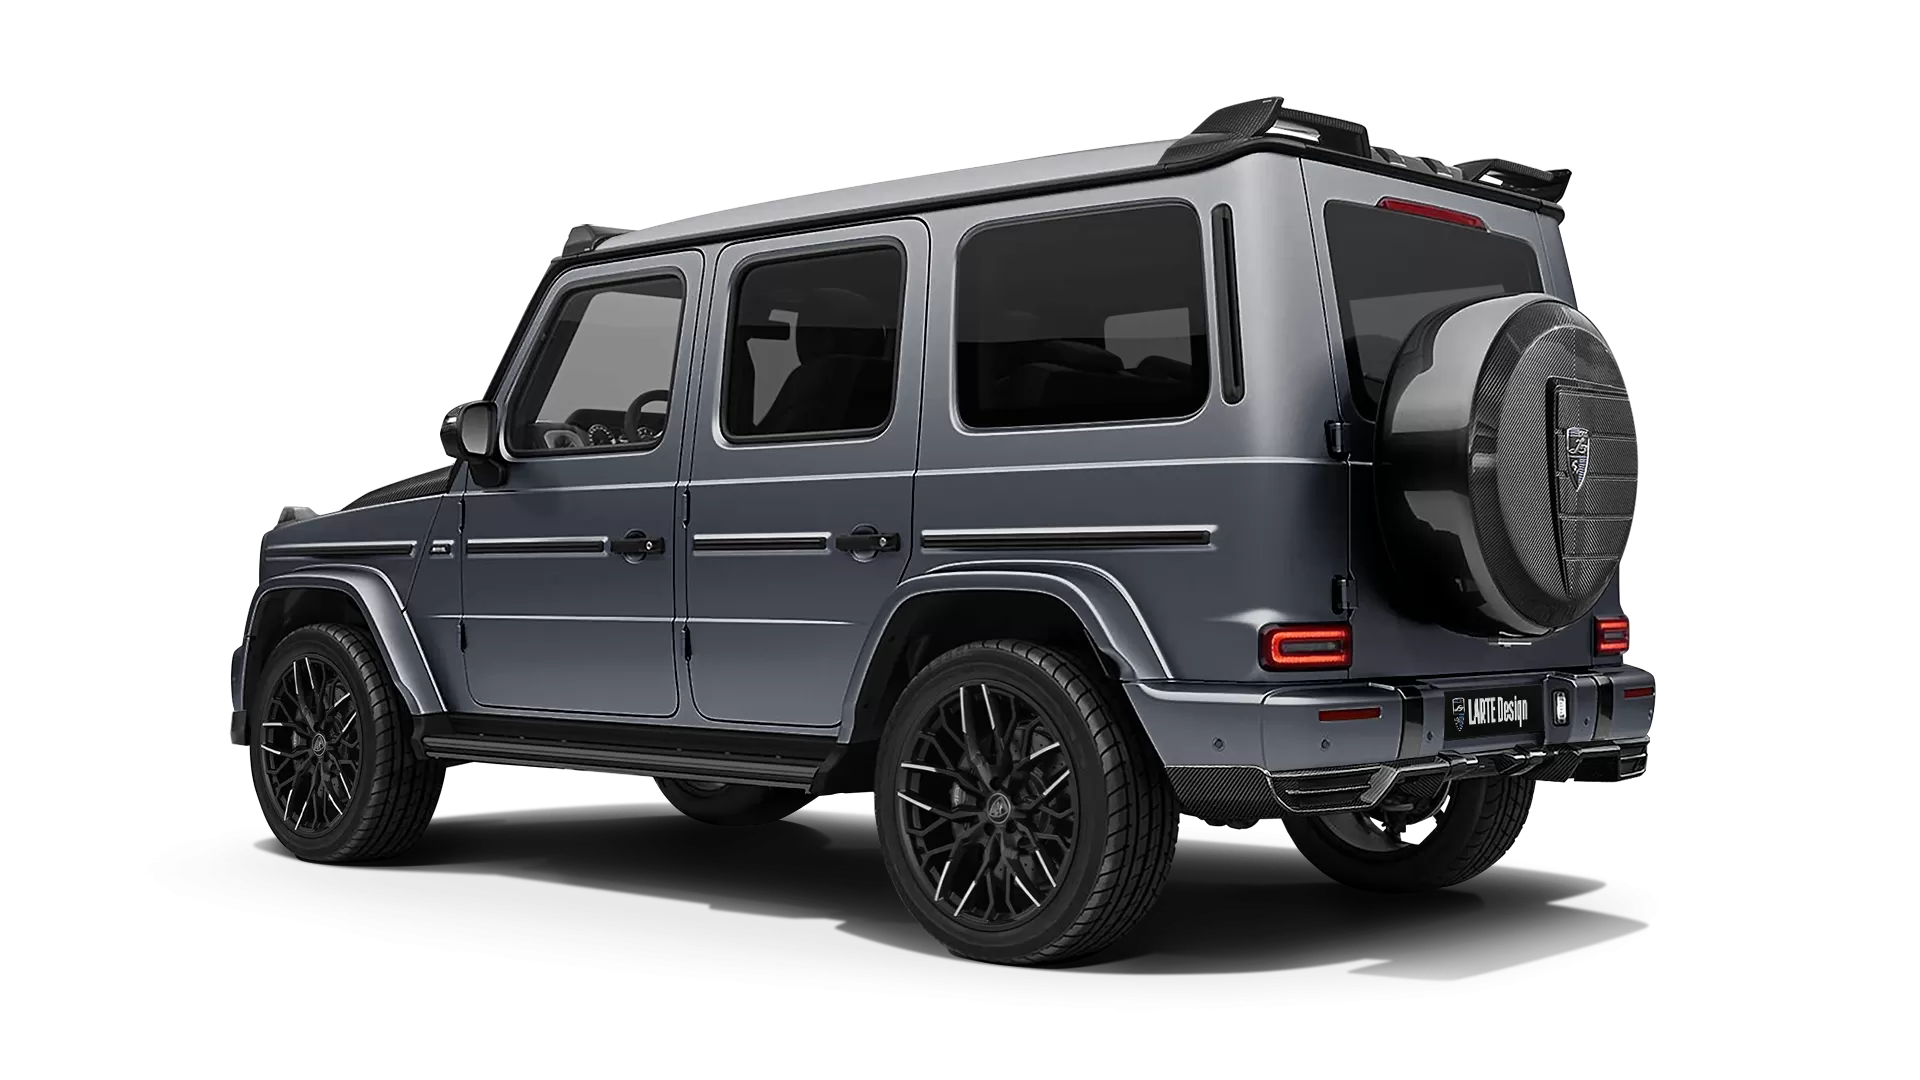 Mercedes G class W463 with carbon body kit: back view shown in Platinum Magno